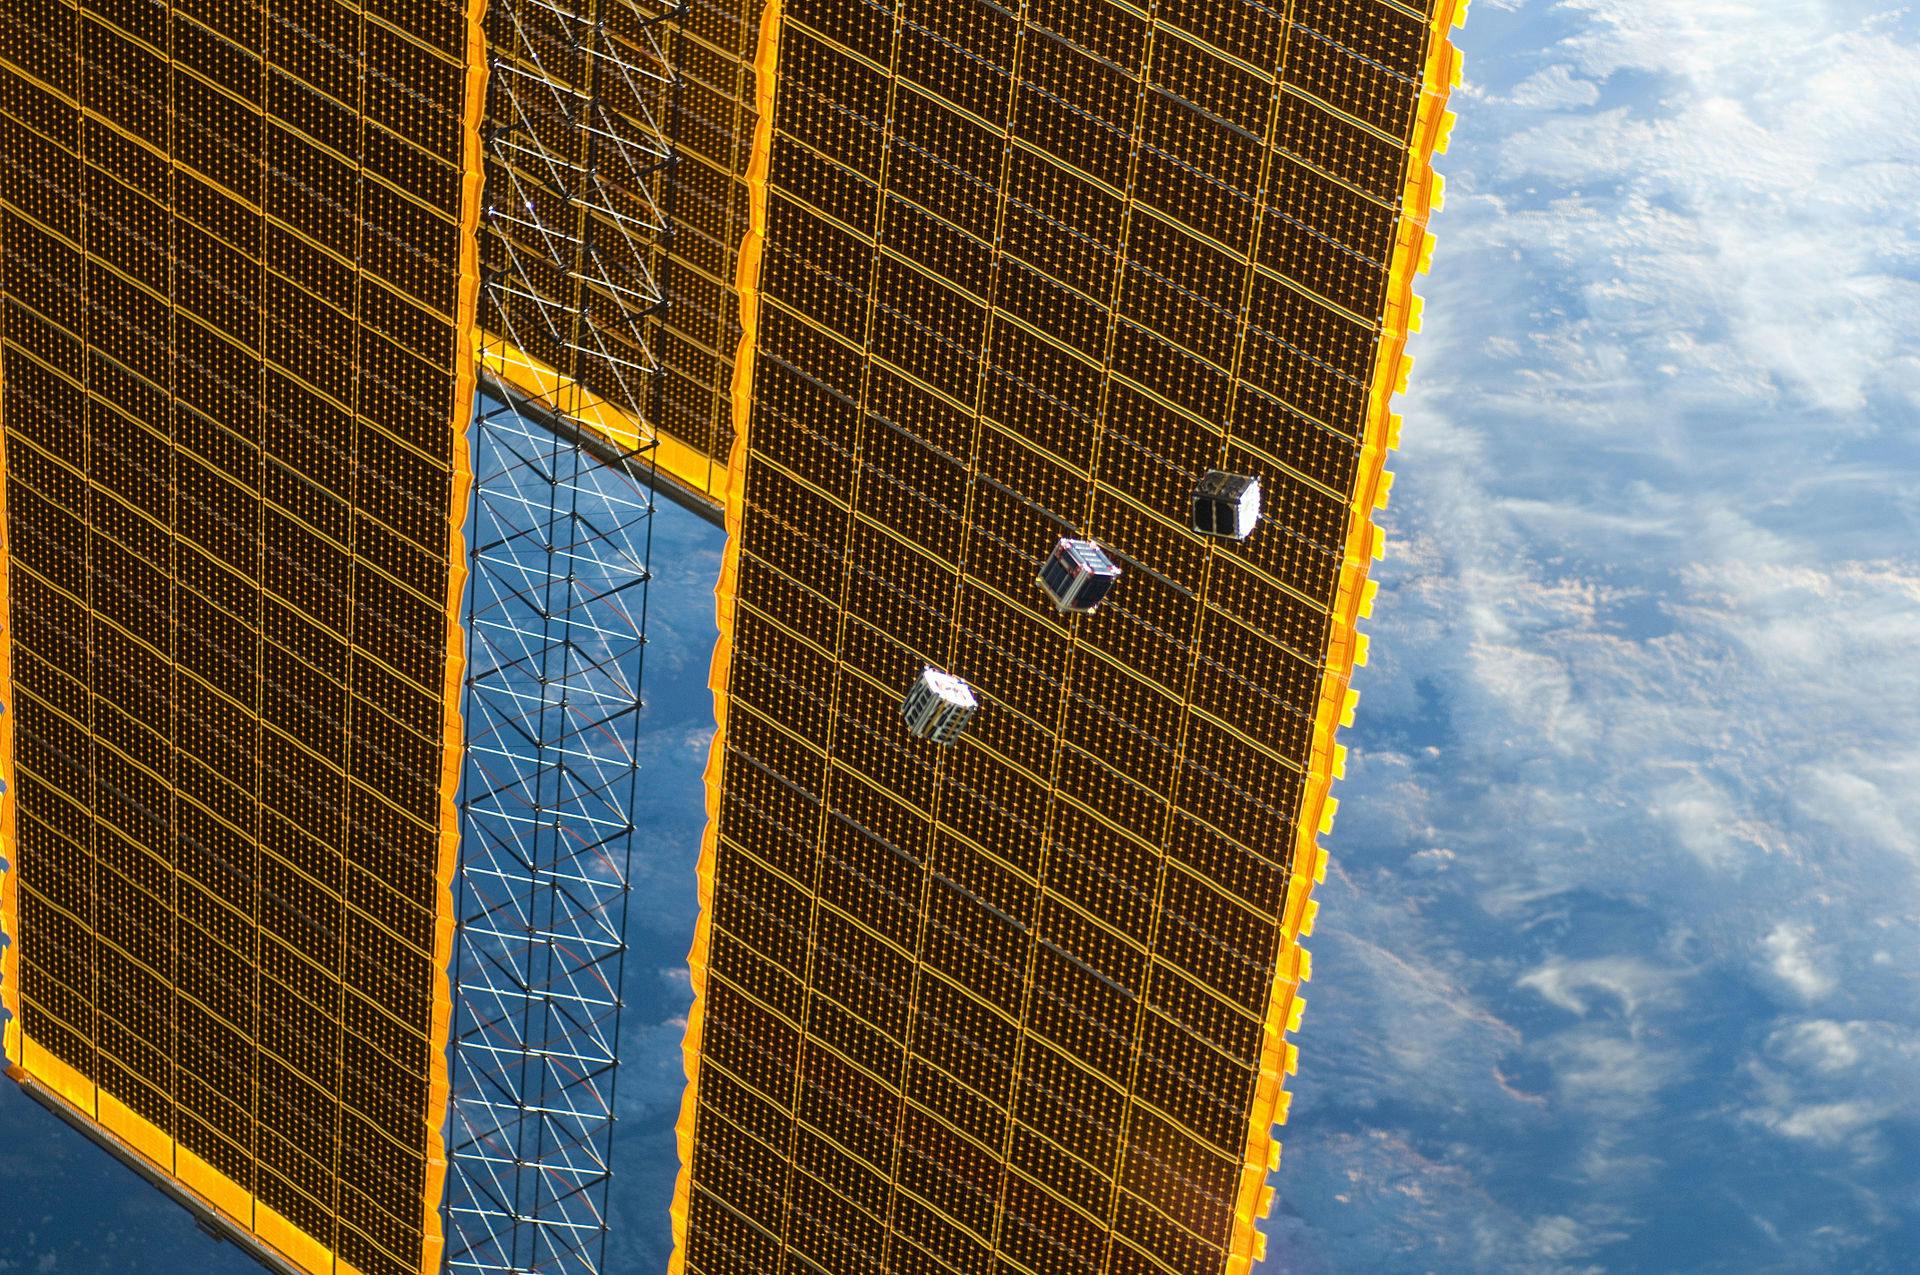 CubeSats released from the ISS in 2012.